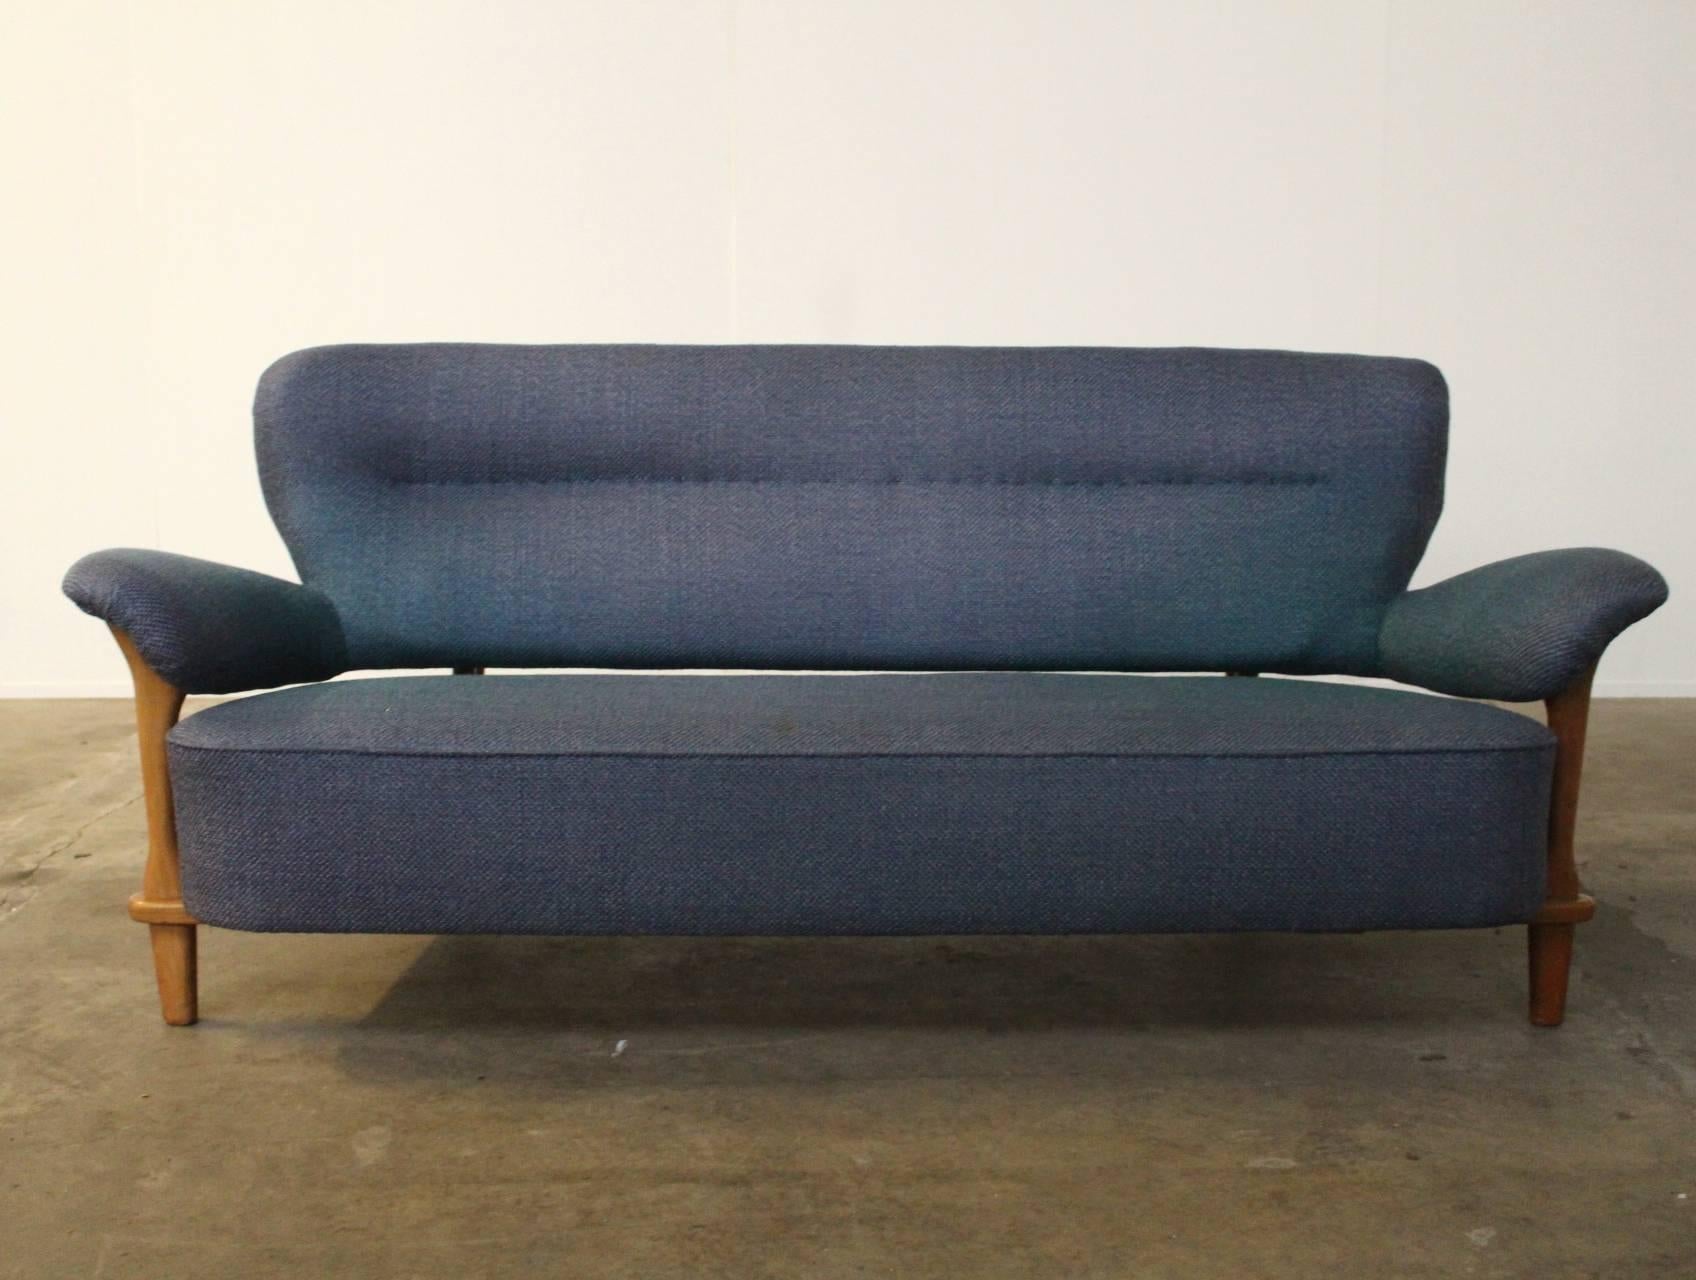 Rare Three-Seat Sofa Model 109 by Theo Ruth for Artifort, Dutch Design, 1950s In Excellent Condition For Sale In Amsterdam, NL